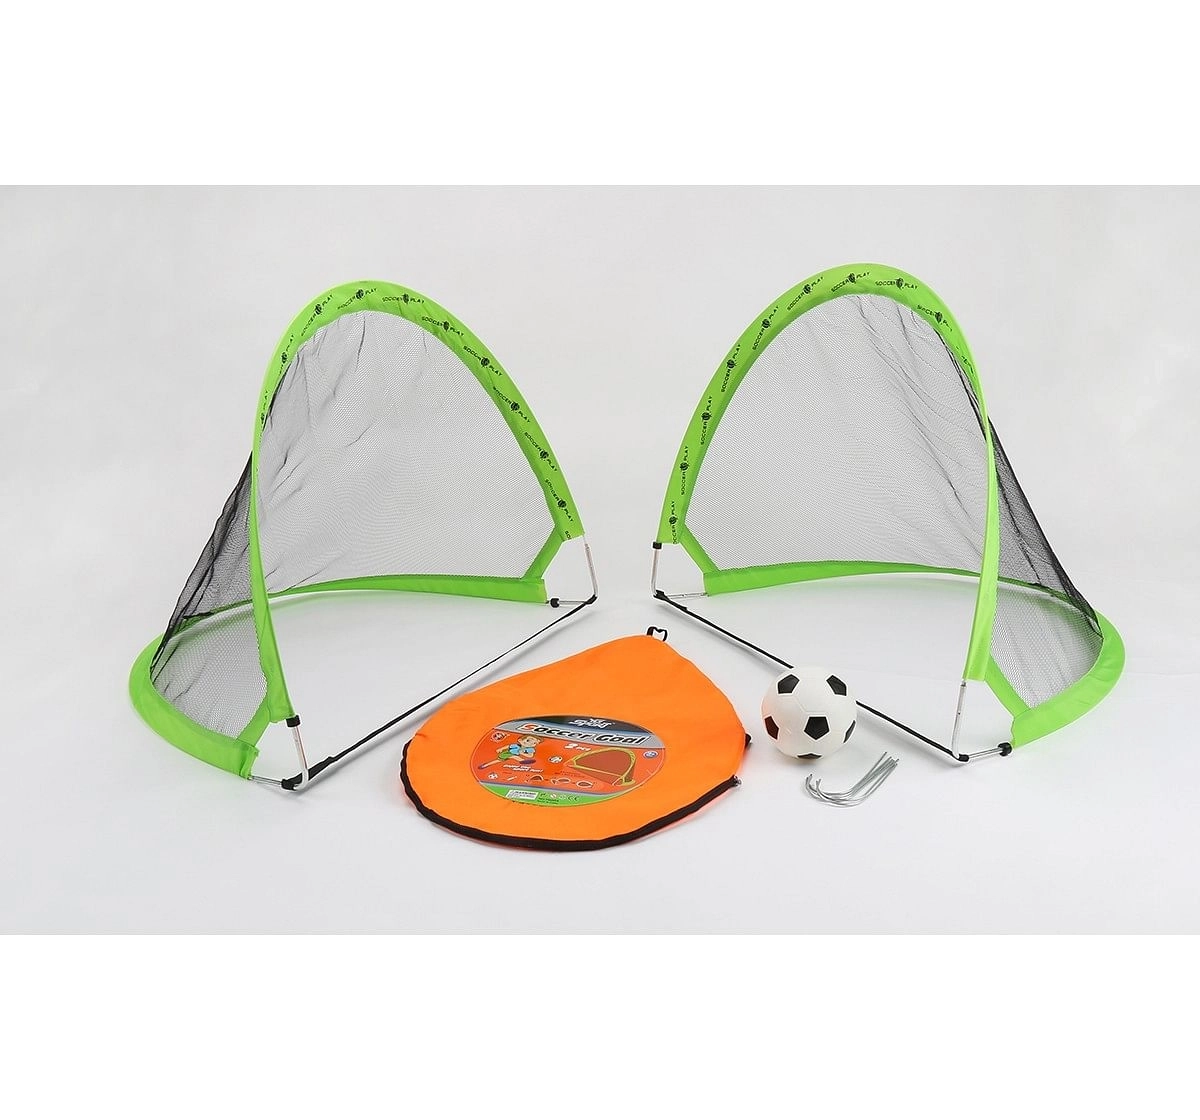 Dihua Football Goal Set for Kids age 3Y+ 